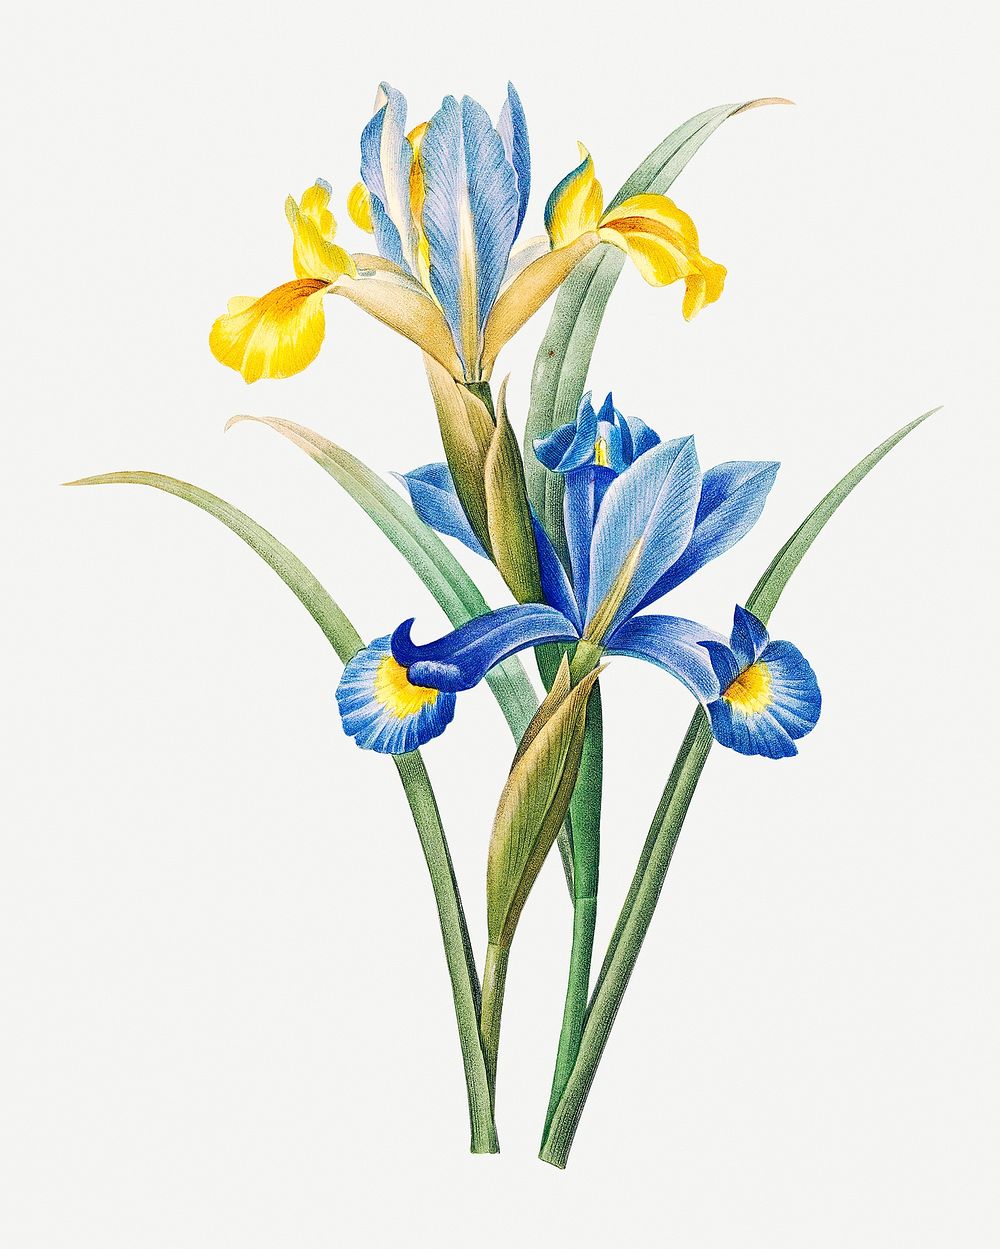 Spanish iris flower psd botanical illustration, remixed from artworks by Pierre-Joseph Redout&eacute;